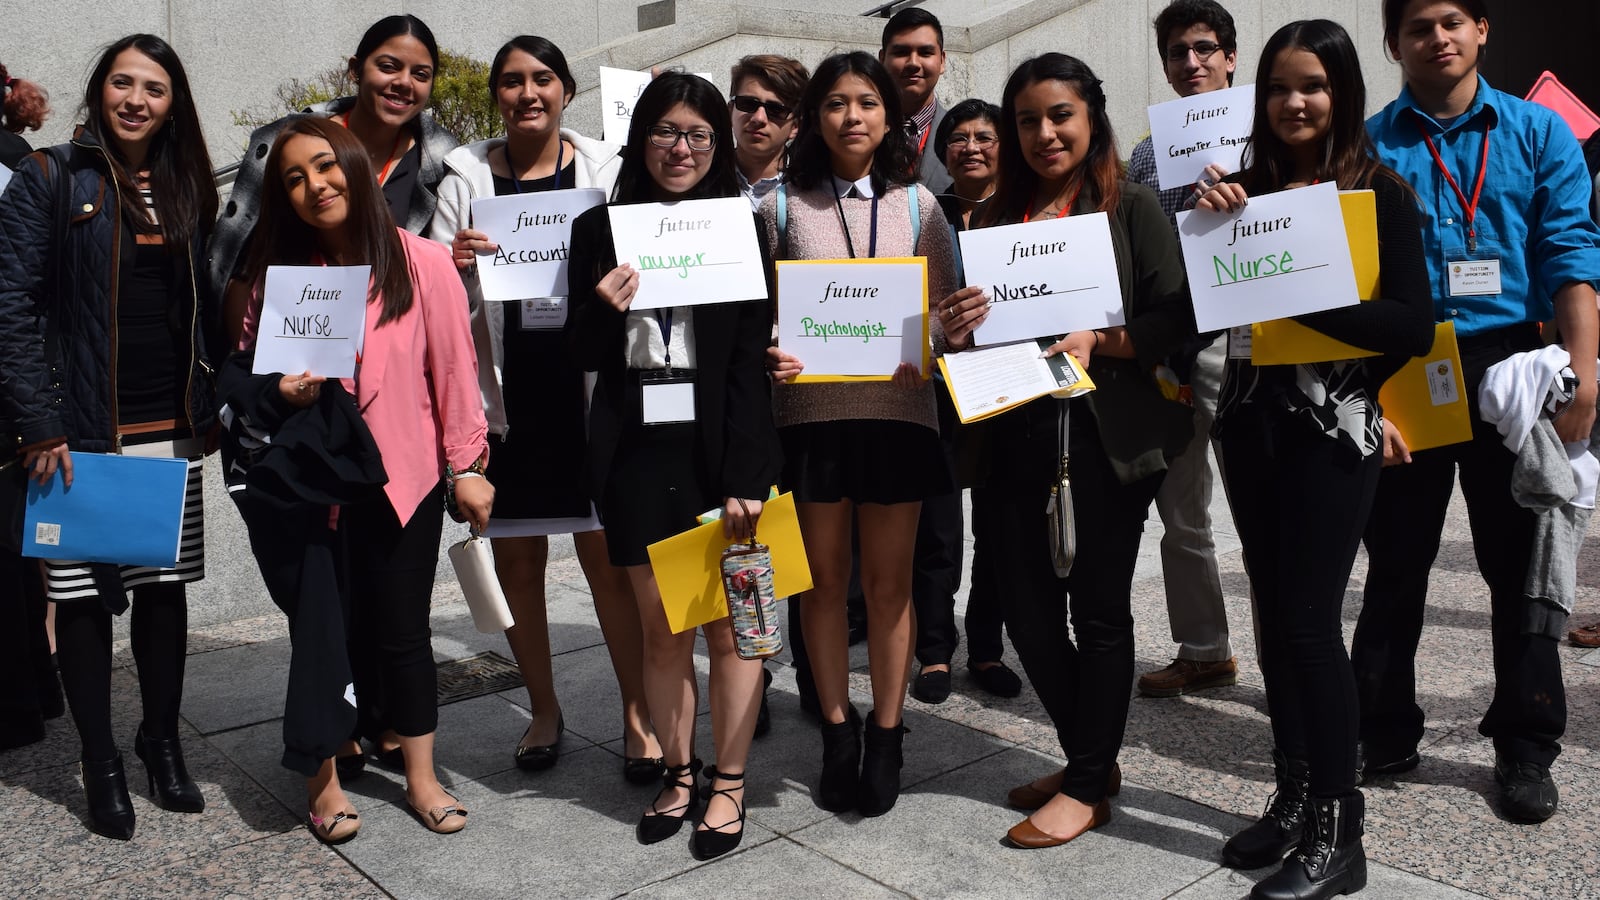 Immigrant students display their career aspirations during a visit to the State Capitol in March to support an unsuccessful bill that would have extended in-state tuition to them.